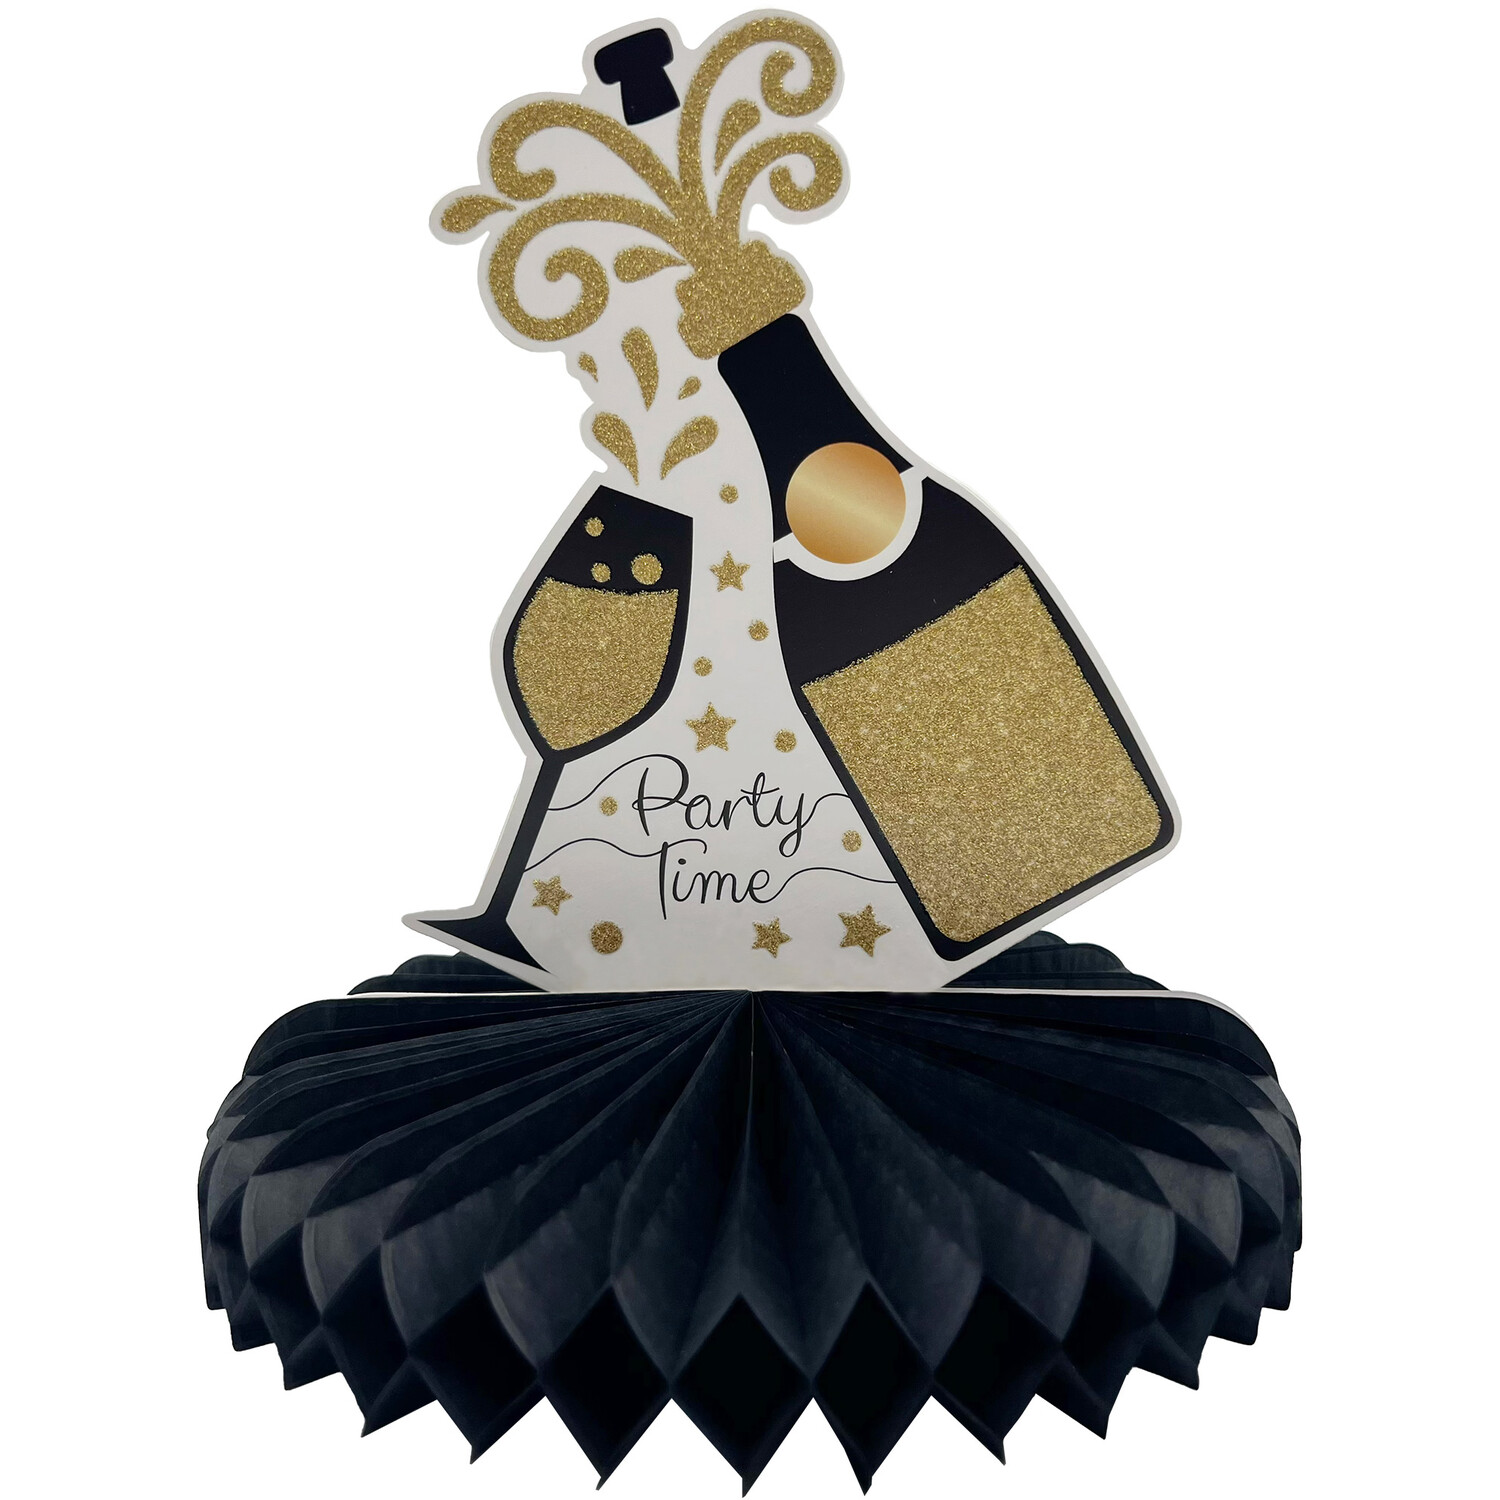 Party Time Honeycomb Table Decoration - Gold Image 2